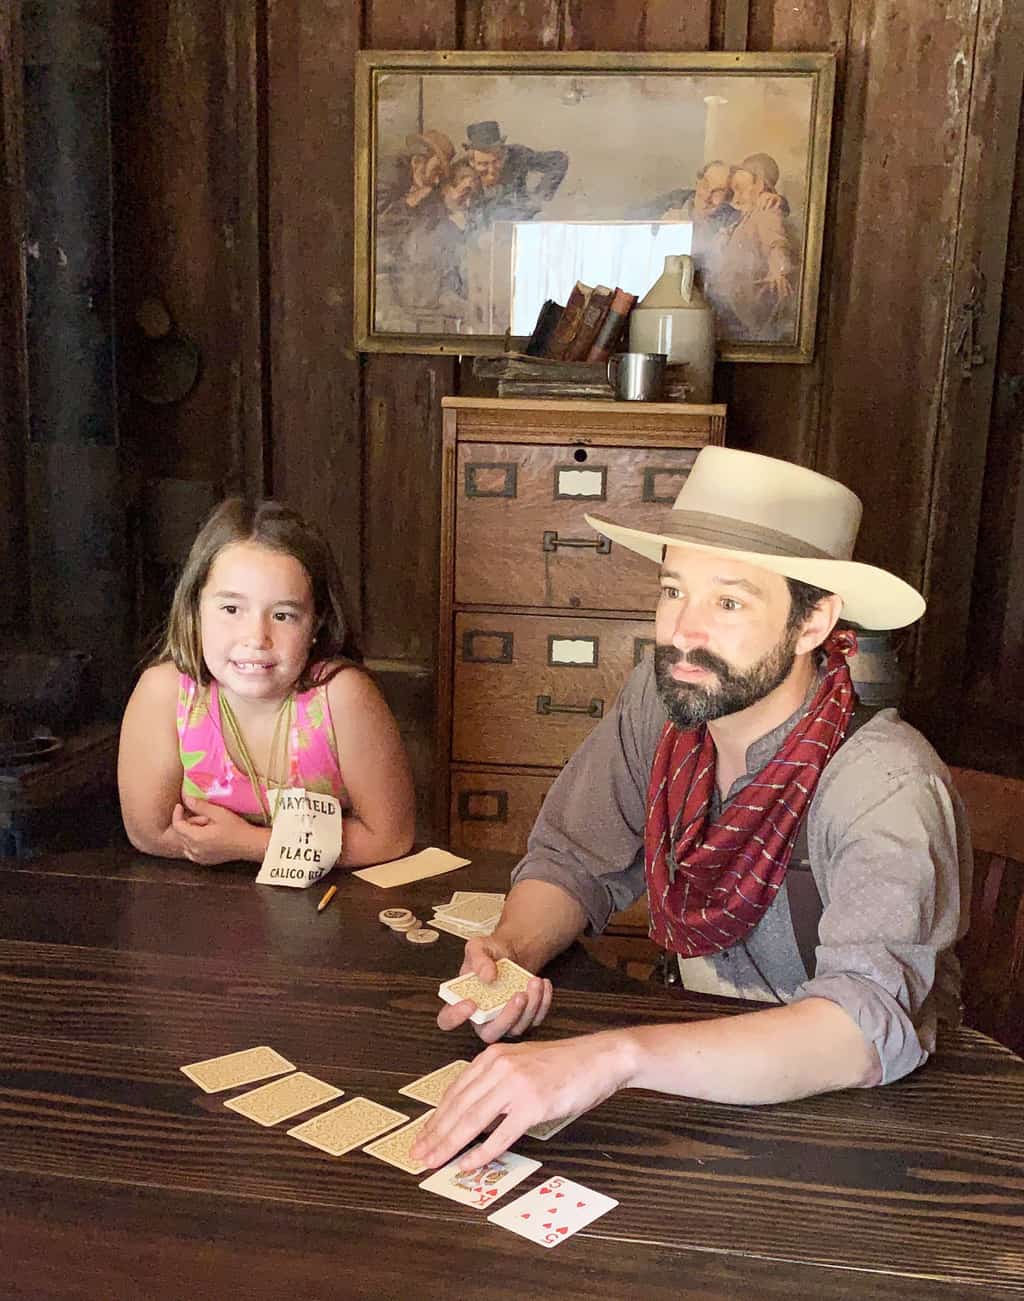 Are you looking for a fun family outing this summer? Then check out Ghost Town Alive at Knott's Berry Farm in Buena Park, California. Ghost Town Alive is chocked full of fun activities like a photo scavenger hunt, hoedown, Snoppy magic show and more.